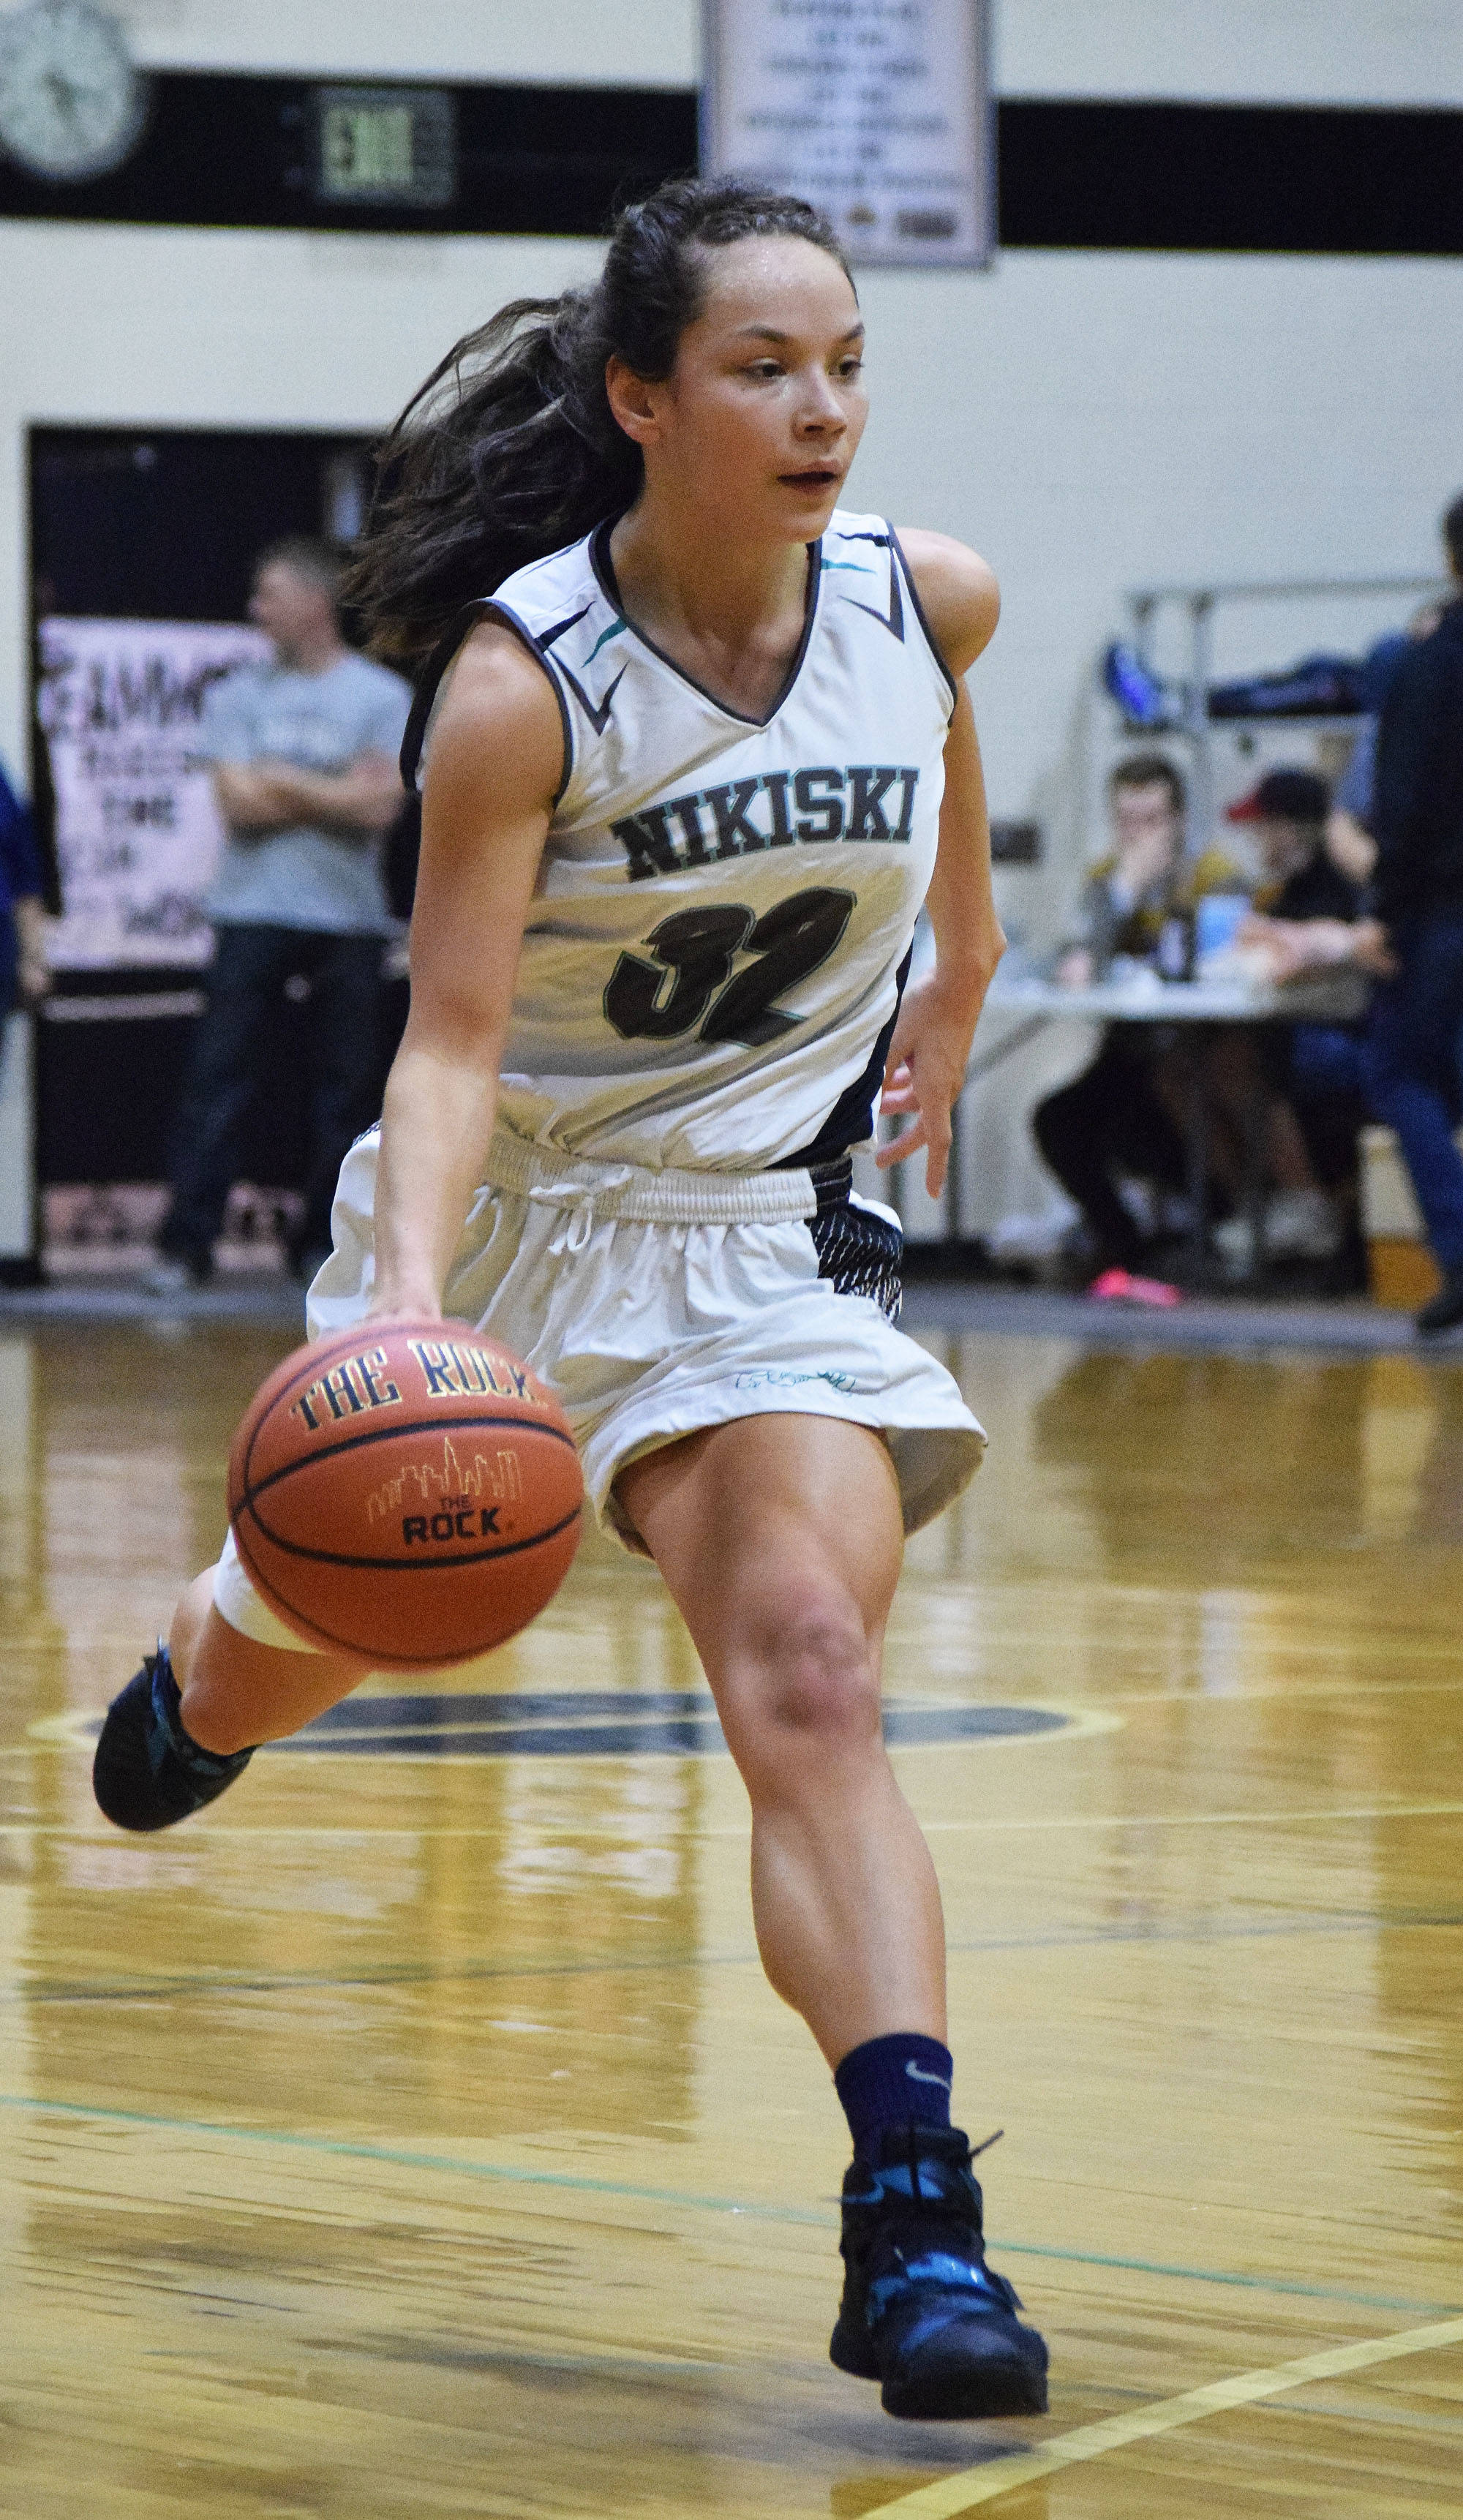 Nikiski’s Rylee Jackson dribbles down the court Friday against Grace Christian at the Southcentral Conference basketball tournament at Nikiski High School. (Photo by Joey Klecka/Peninsula Clarion)